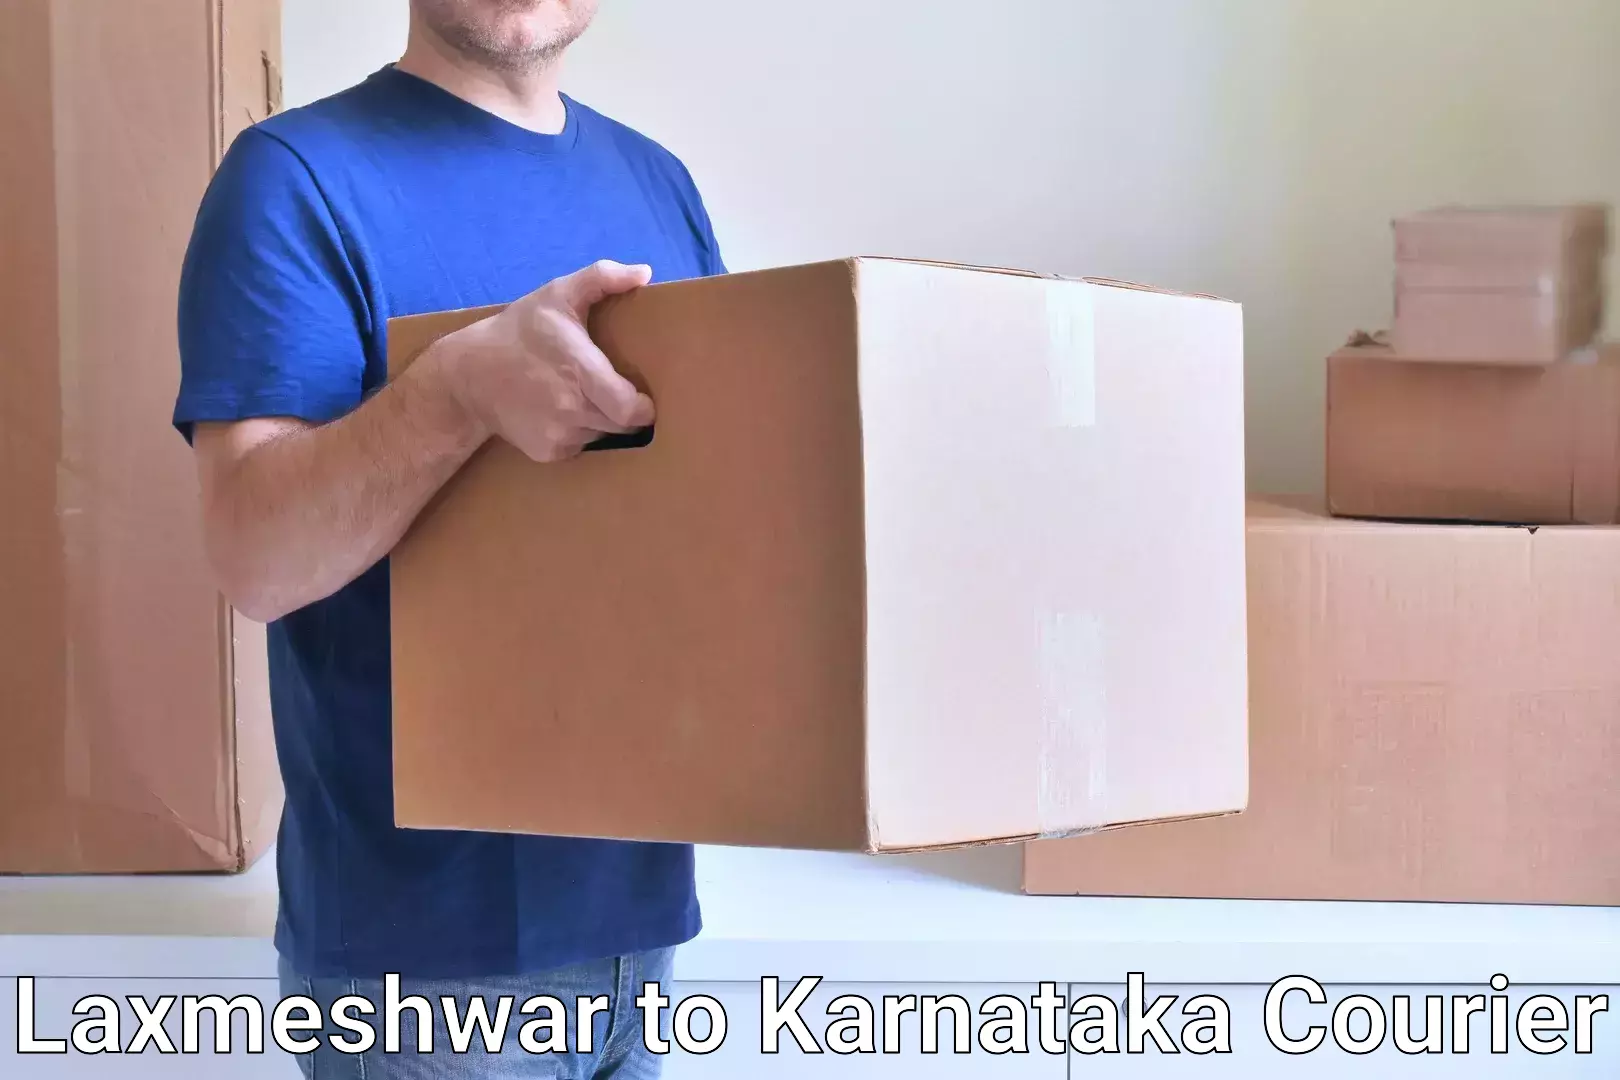 Courier service comparison Laxmeshwar to Thirthahalli